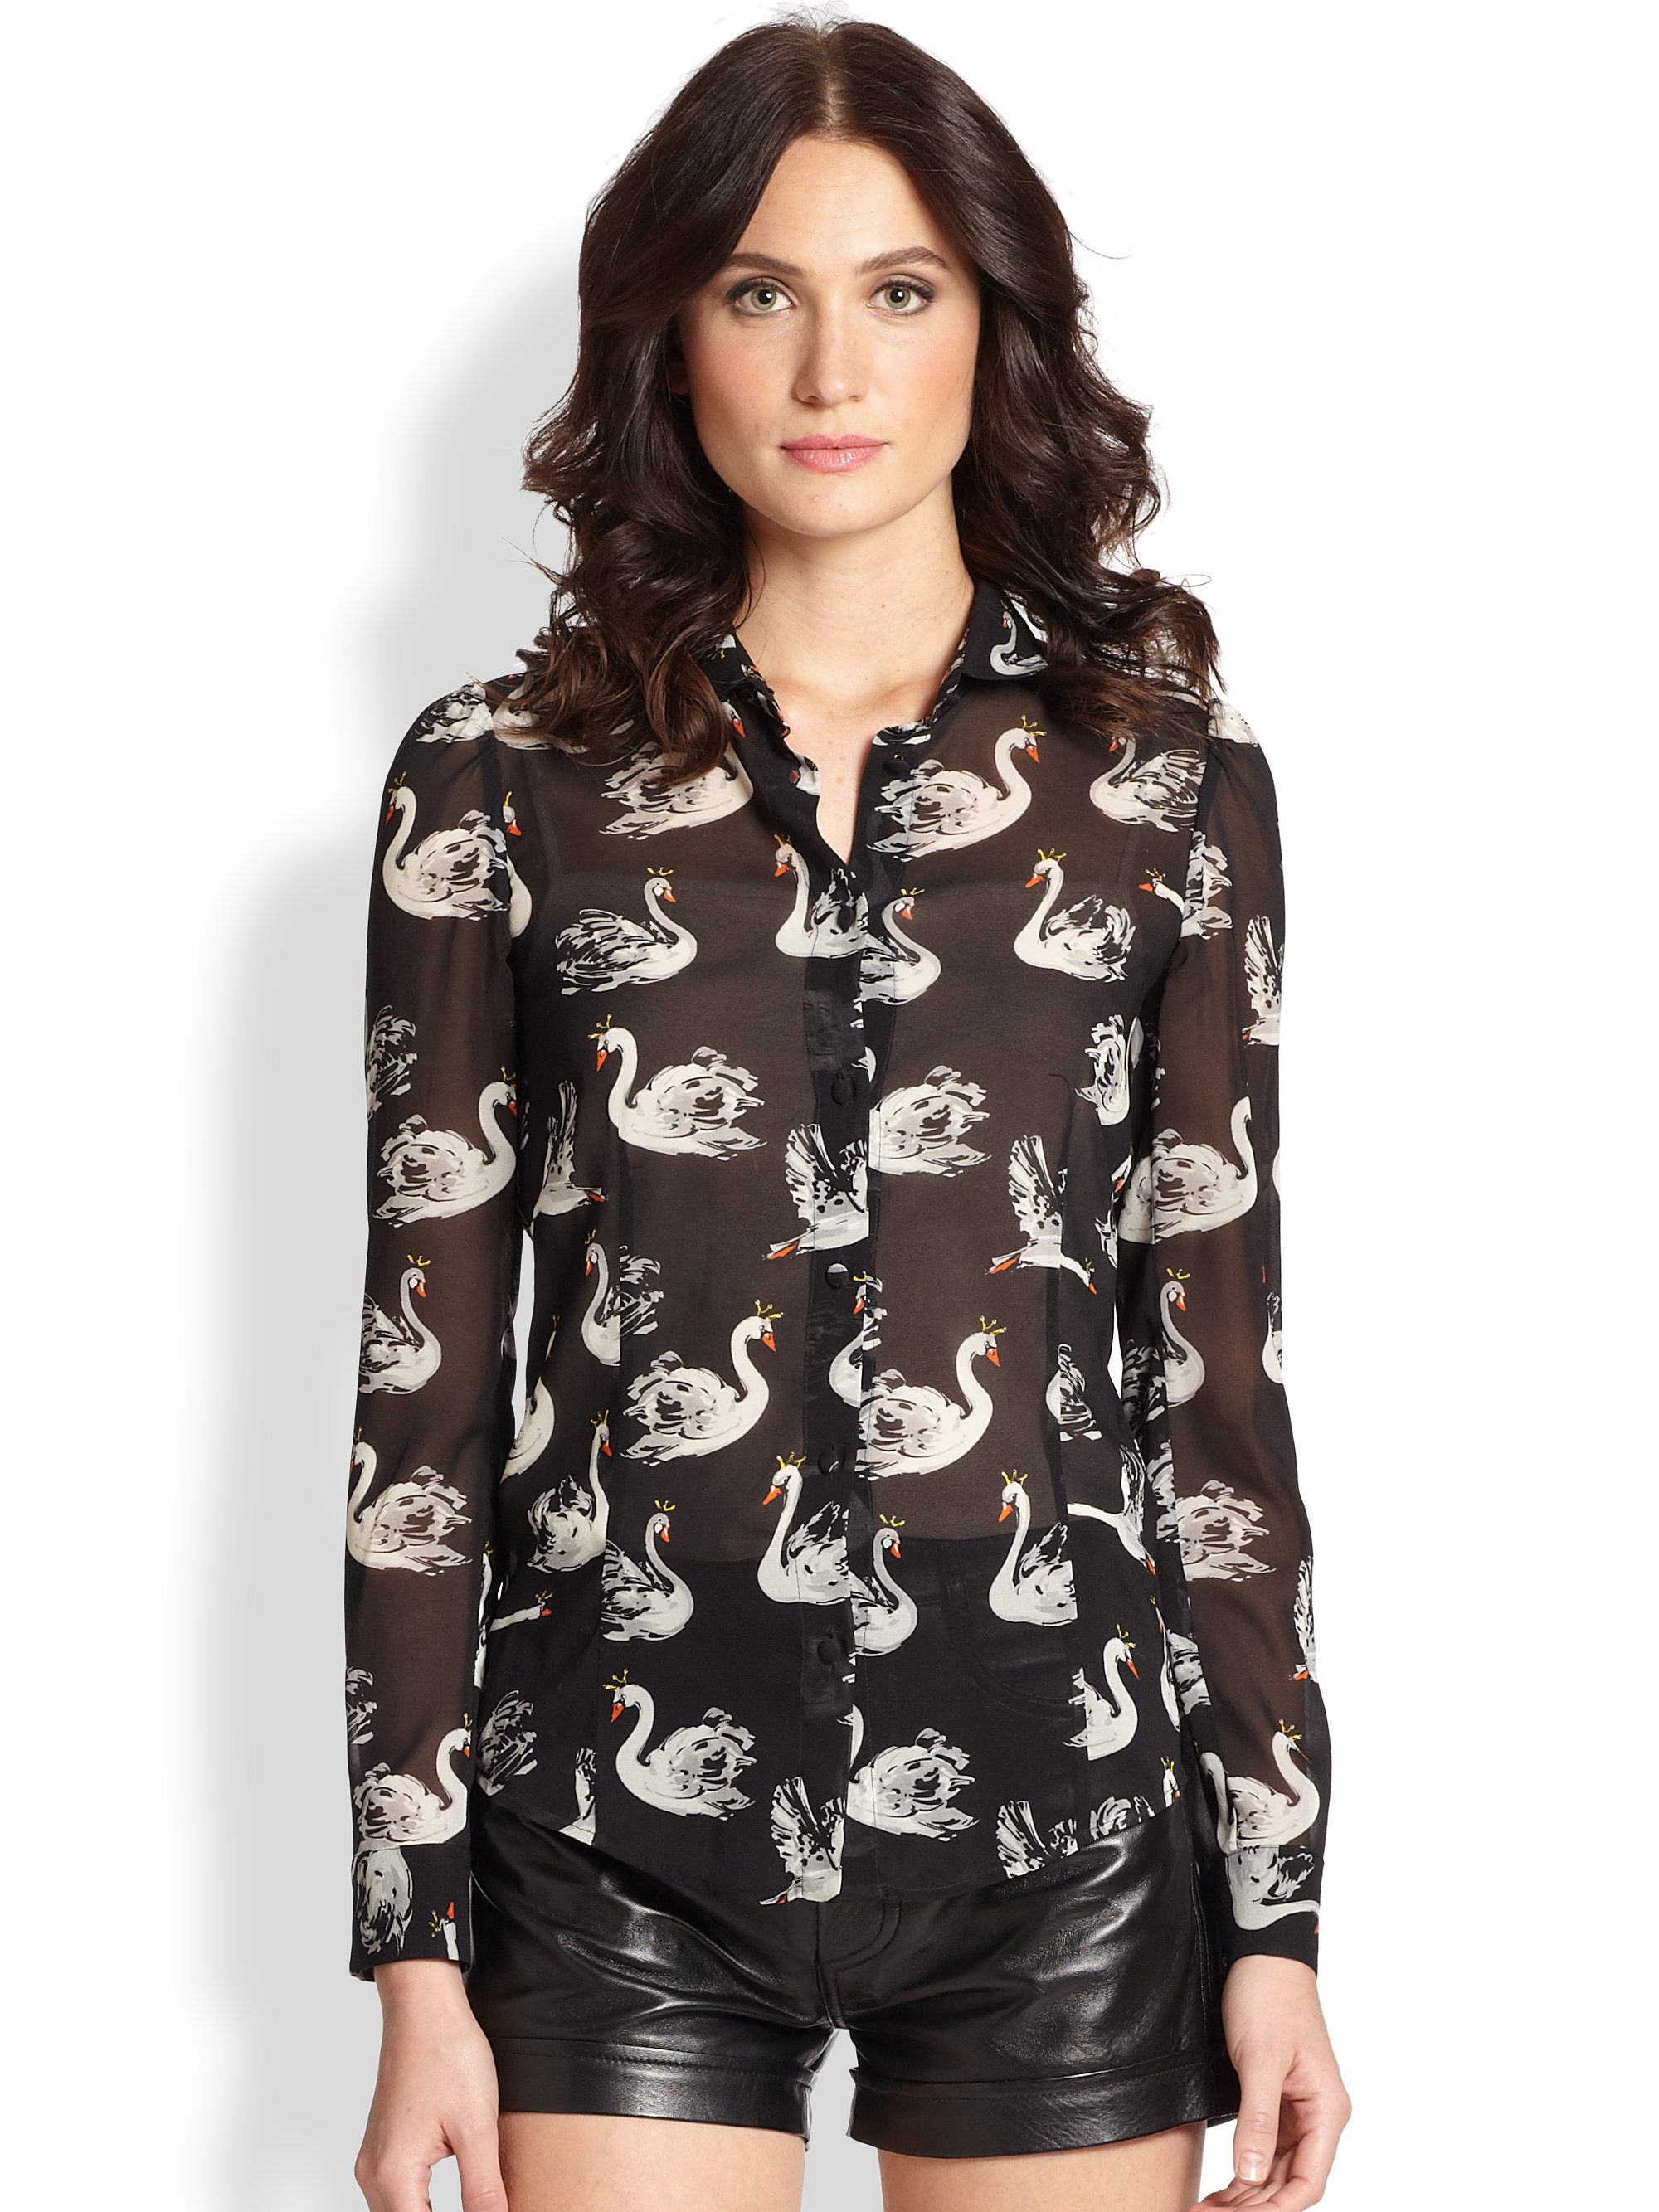 klud Skøn Marco Polo RED Valentino Silk Swan-Print Blouse in Black - Lyst